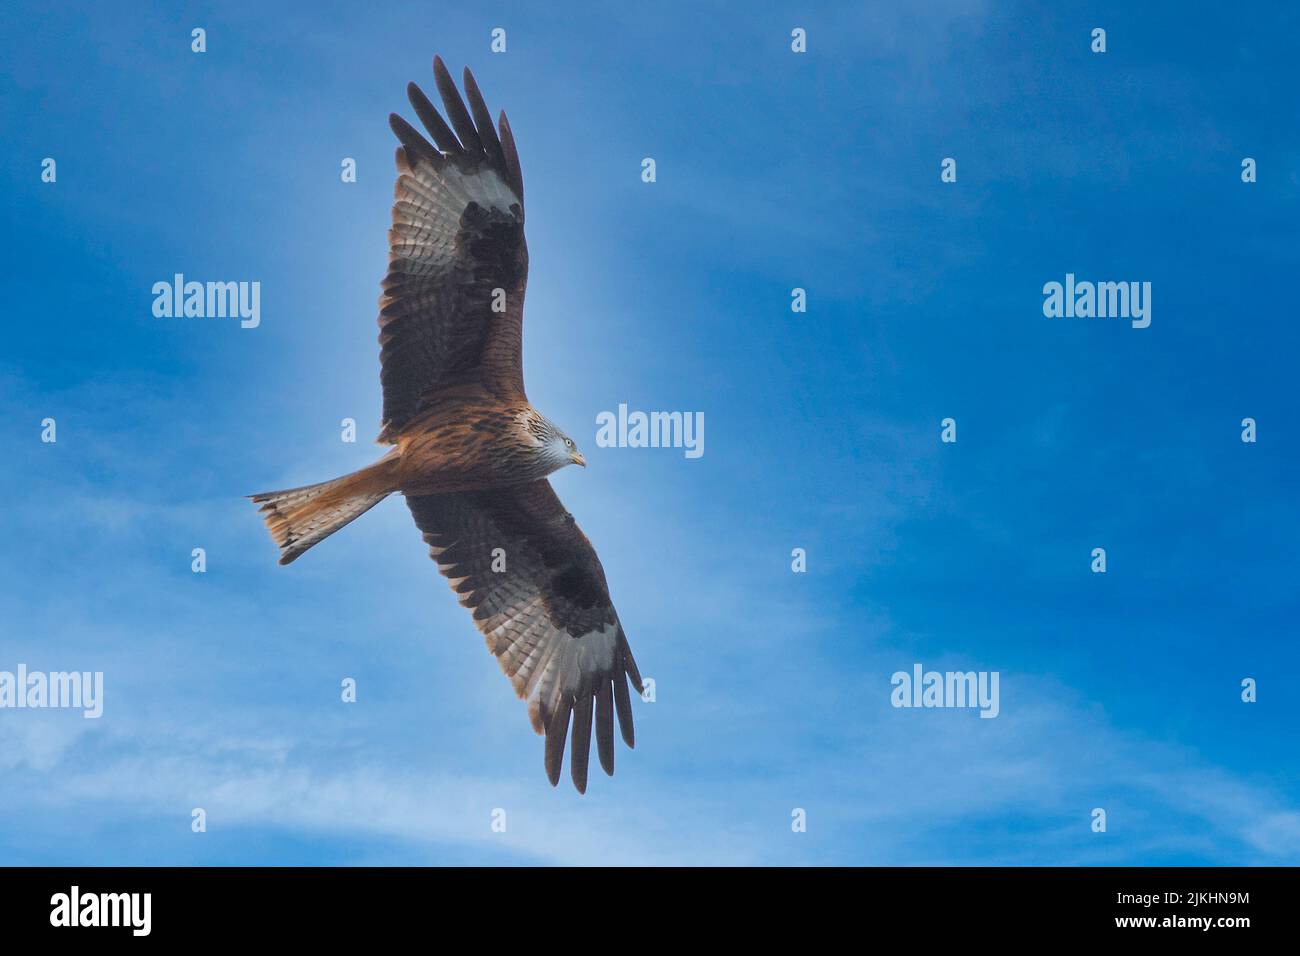 A low angle shot of a beautiful Red kite bird soaring through the clear blue sky Stock Photo